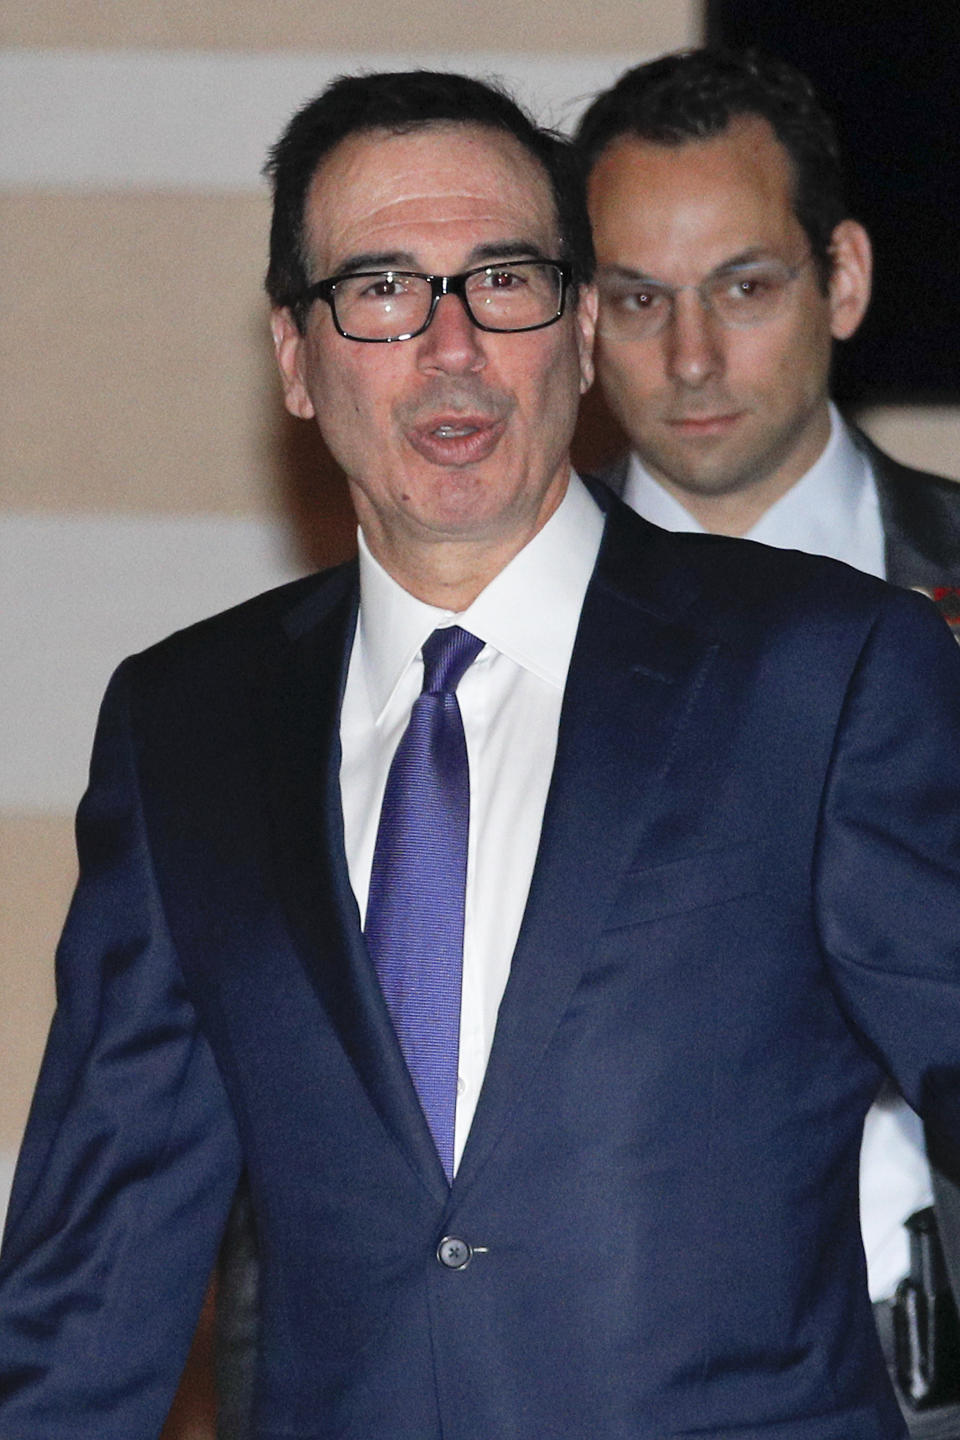 U.S. Treasury Secretary Steven Mnuchin speaks to journalists as he leaves a hotel to attend a new round of high-level trade talks with Chinese officials in Beijing, Thursday, Feb. 14, 2019. (AP Photo/Andy Wong)